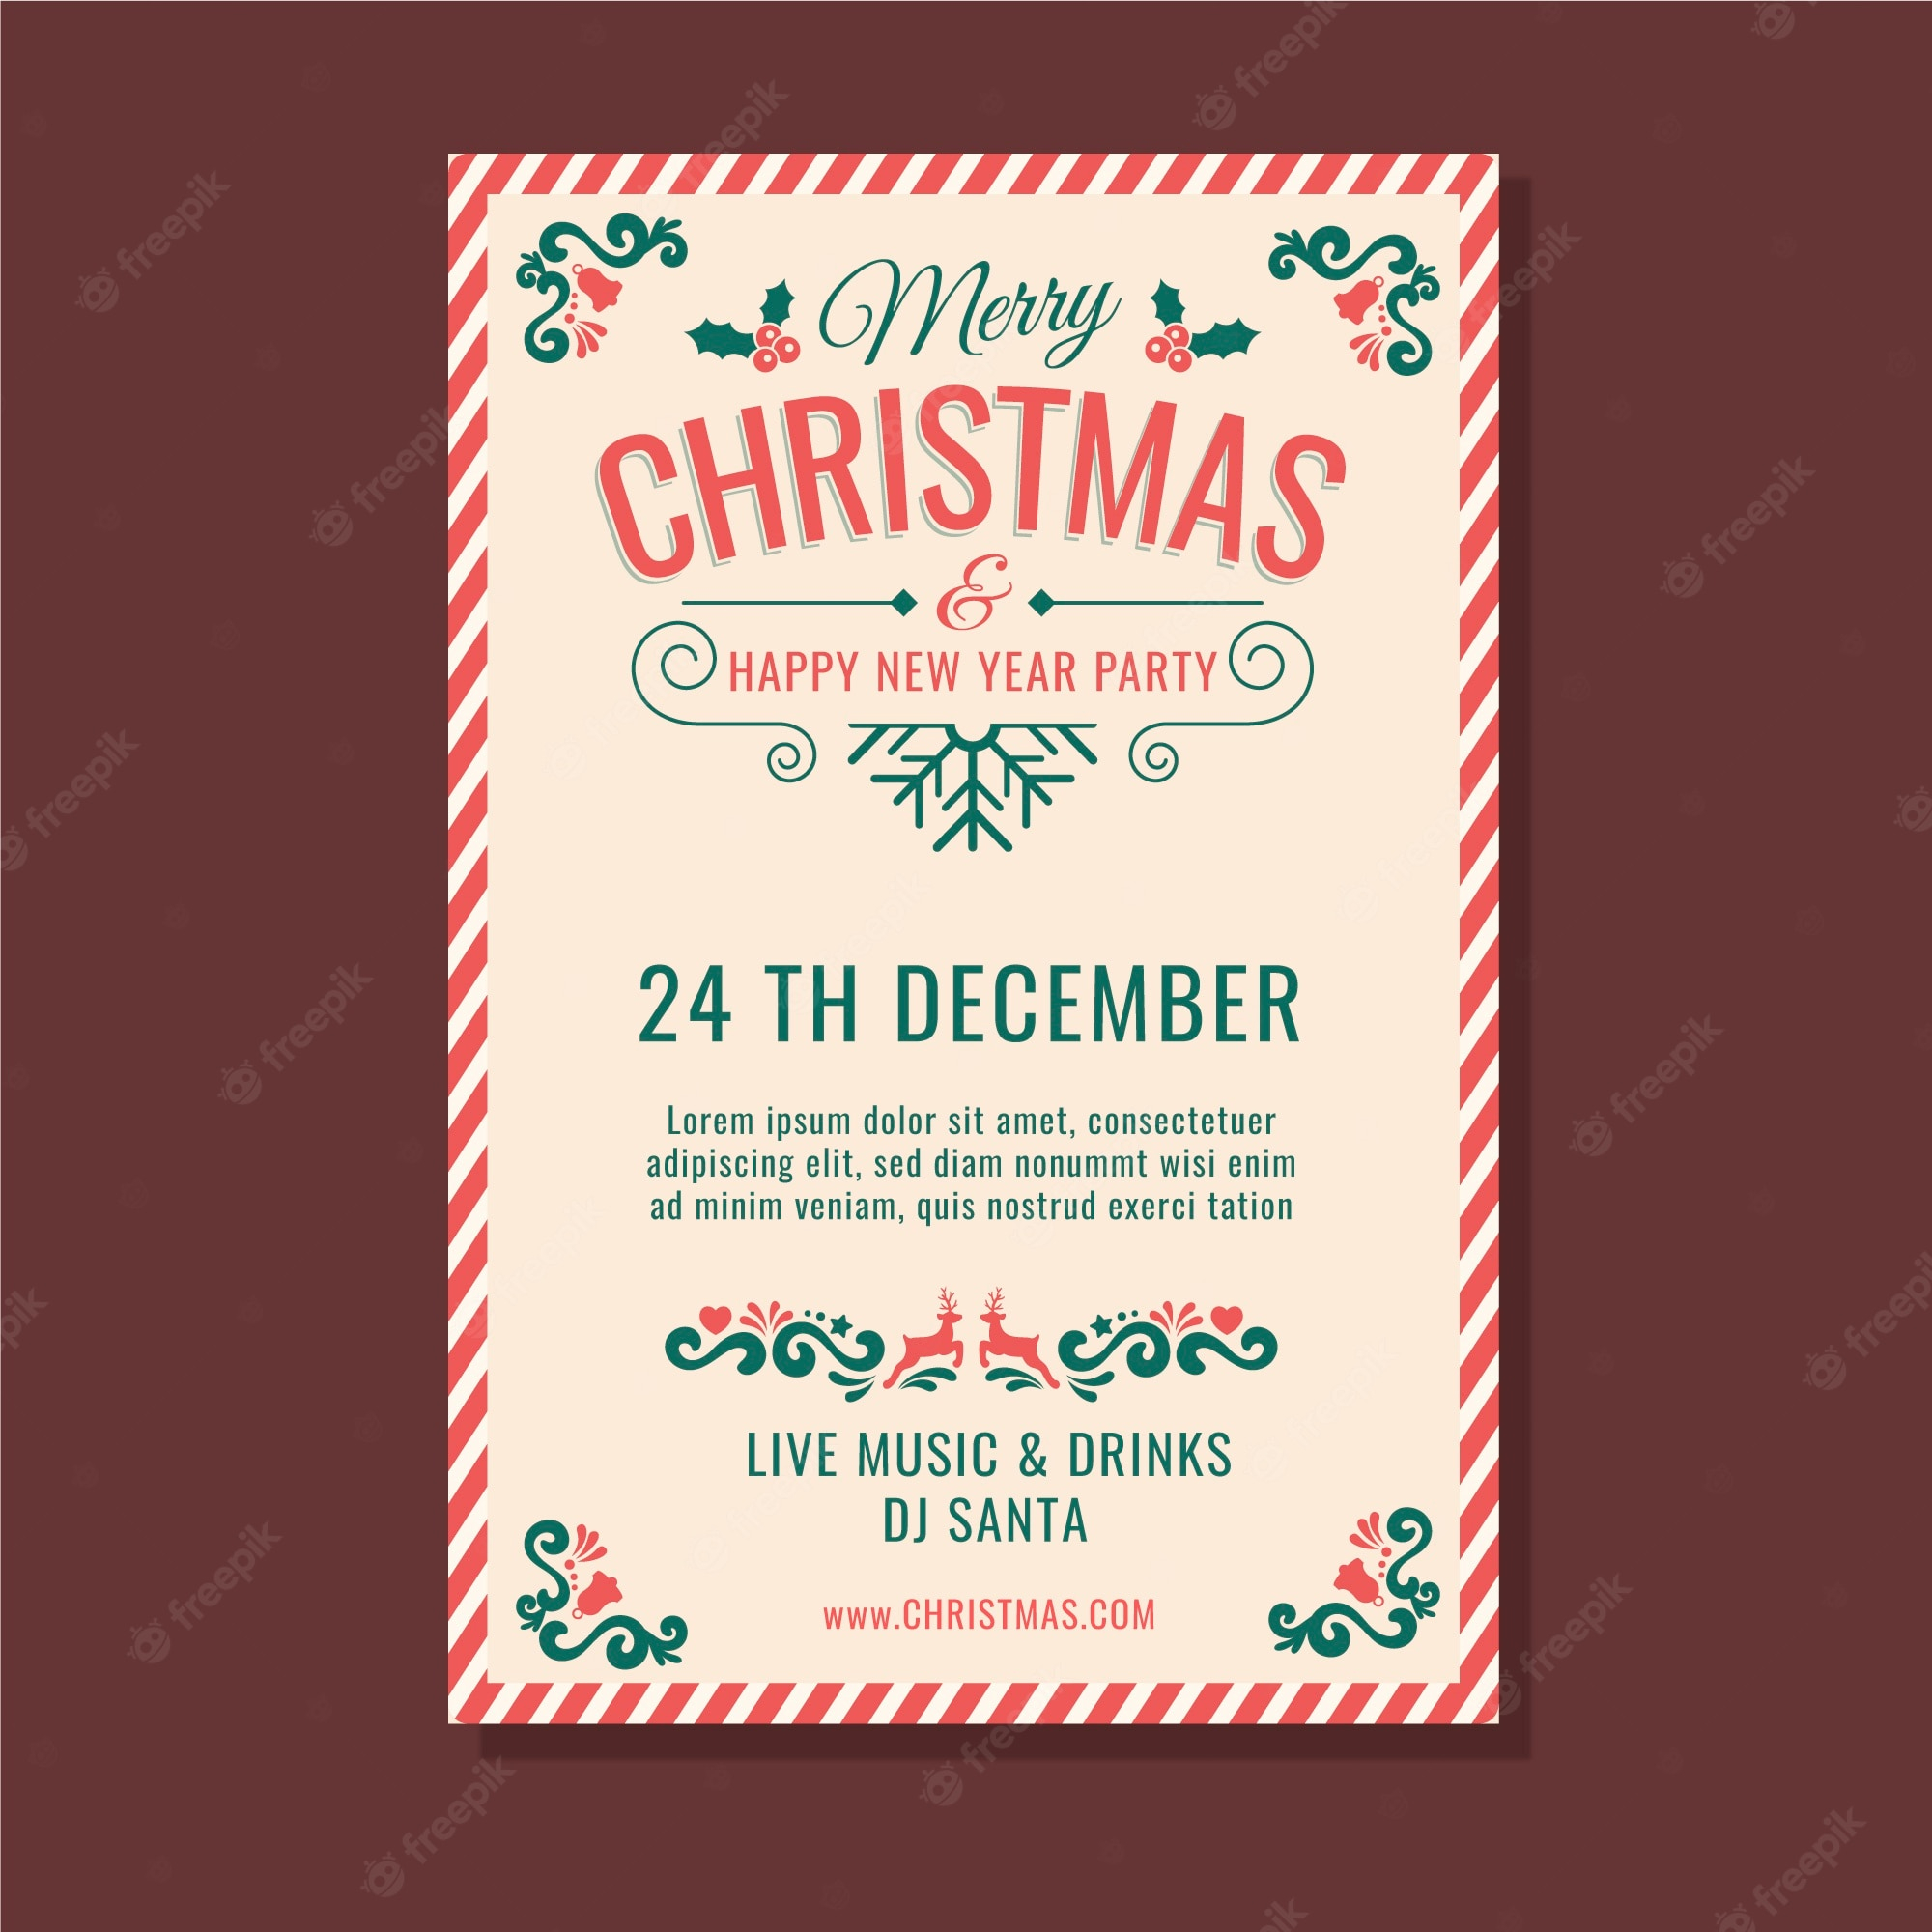 Christmas flyer Images  Free Vectors, Stock Photos & PSD Pertaining To Christmas Brochure Templates Free